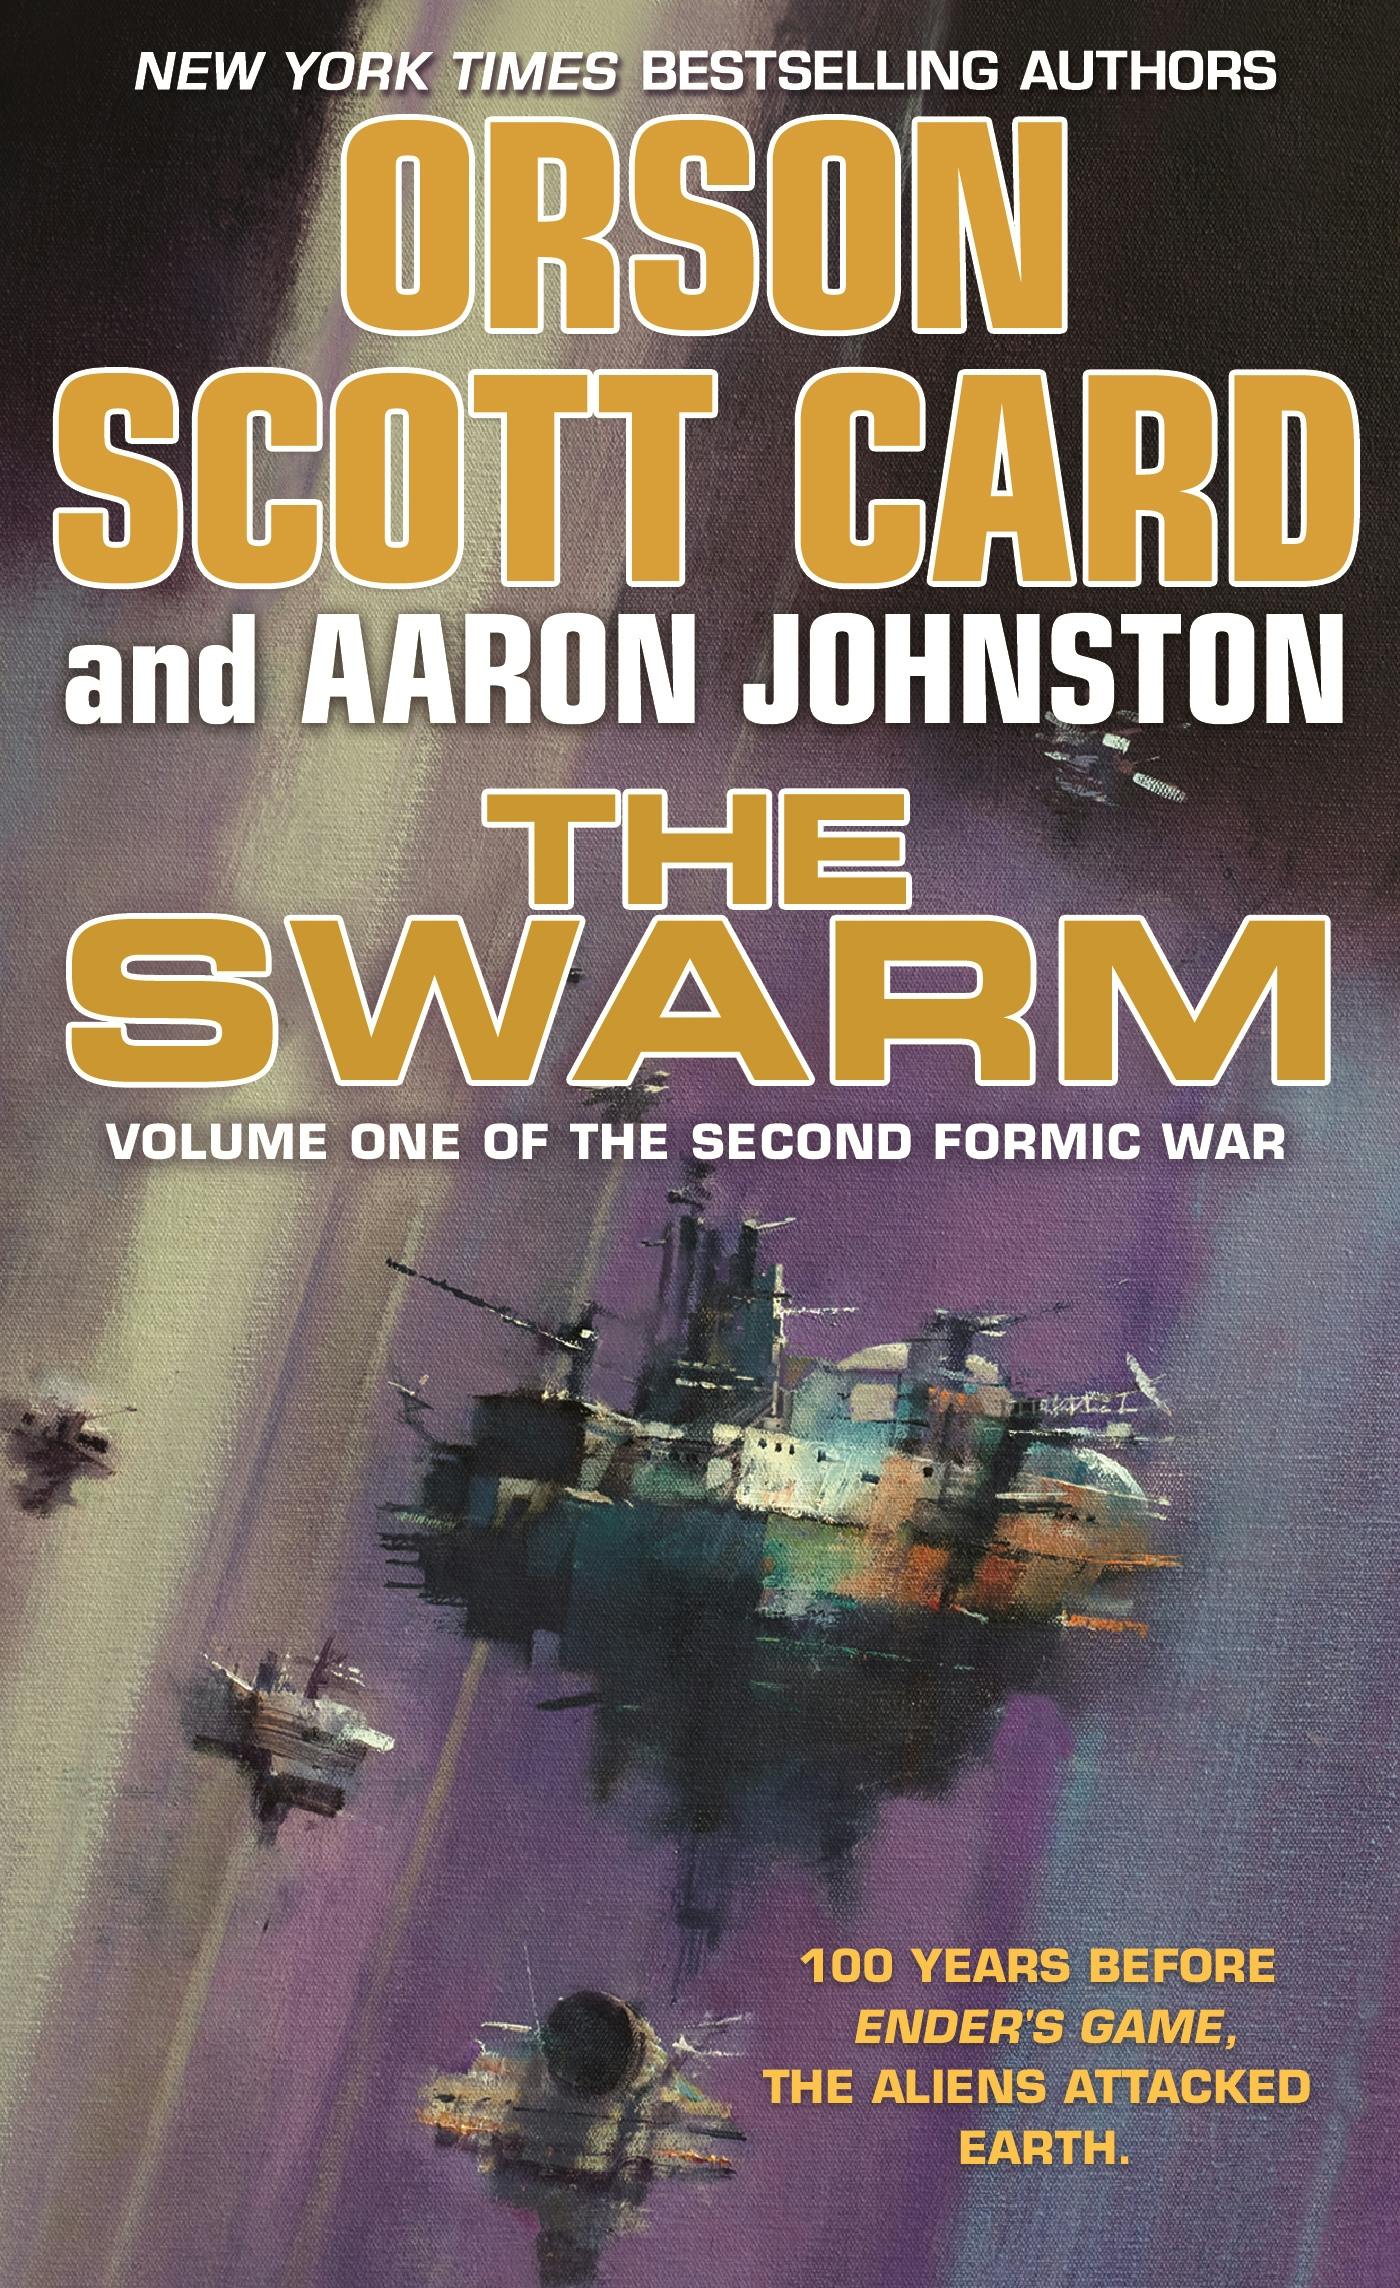 Image of The Swarm